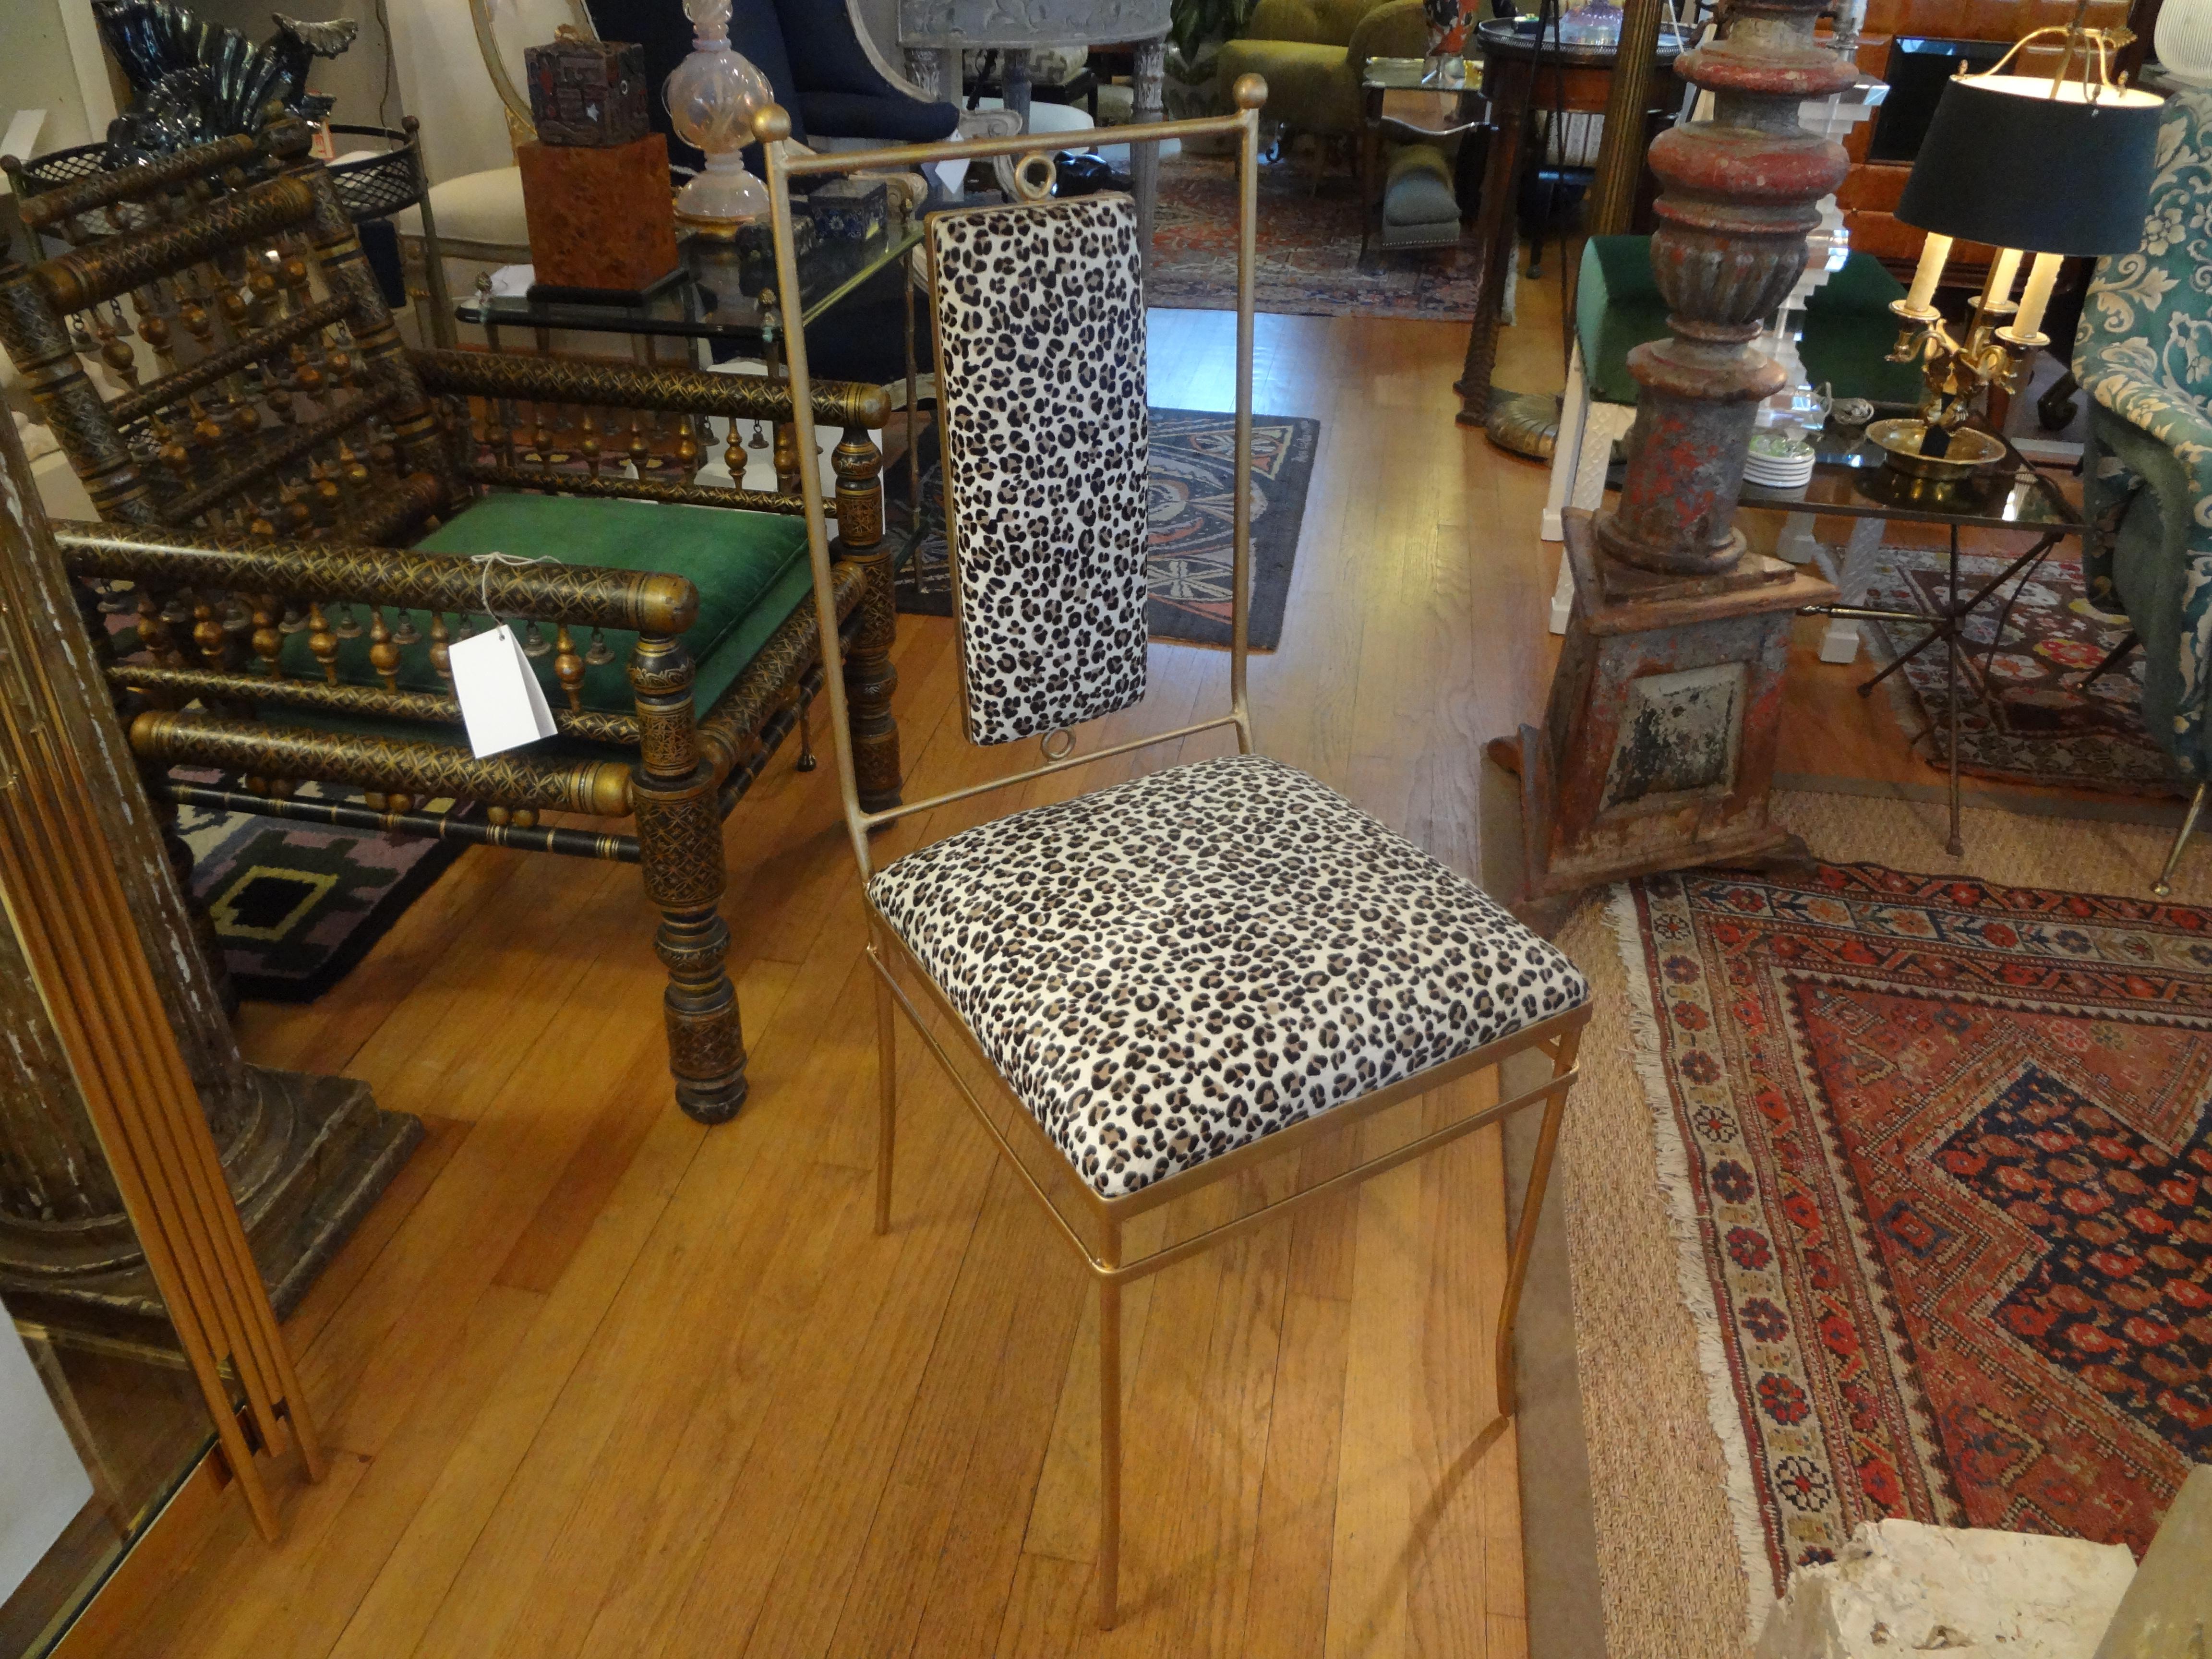 Italian Gilt Iron Chair with Leopard Print Hide Upholstery, Gio Ponti Inspired 4